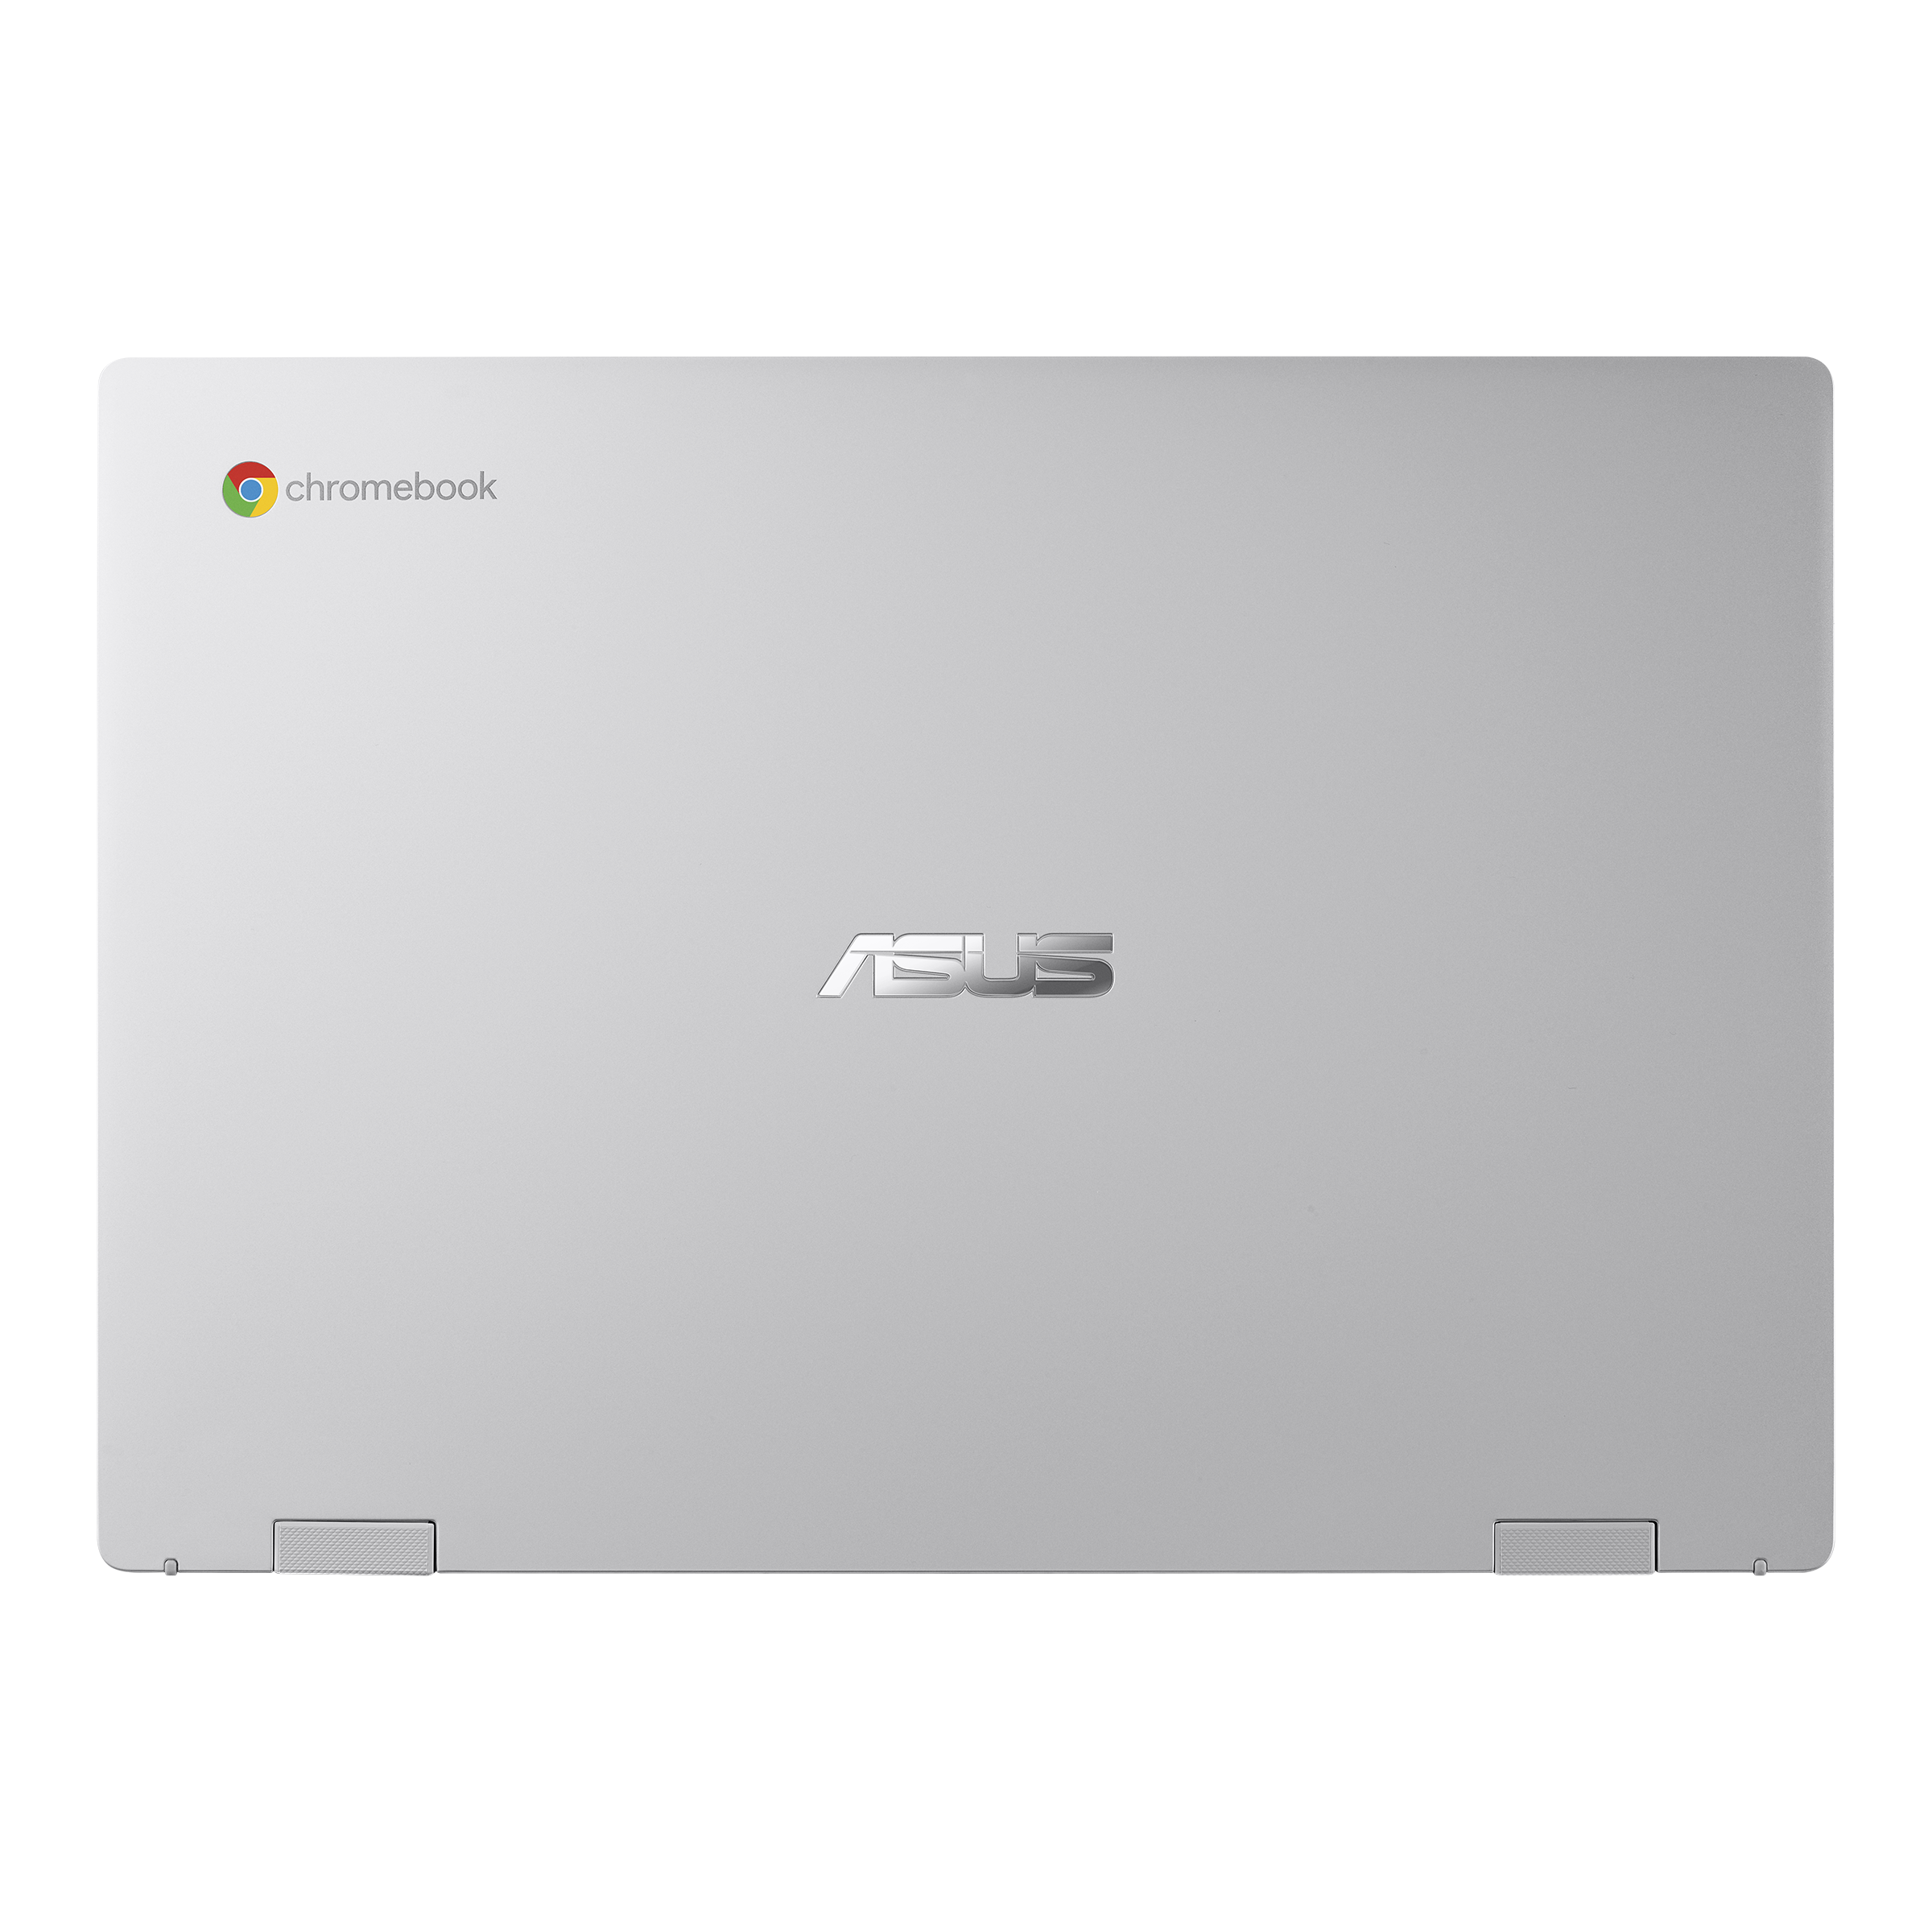 ASUS Chromebook CX1 (CX1400)｜Laptops For Home｜ASUS USA